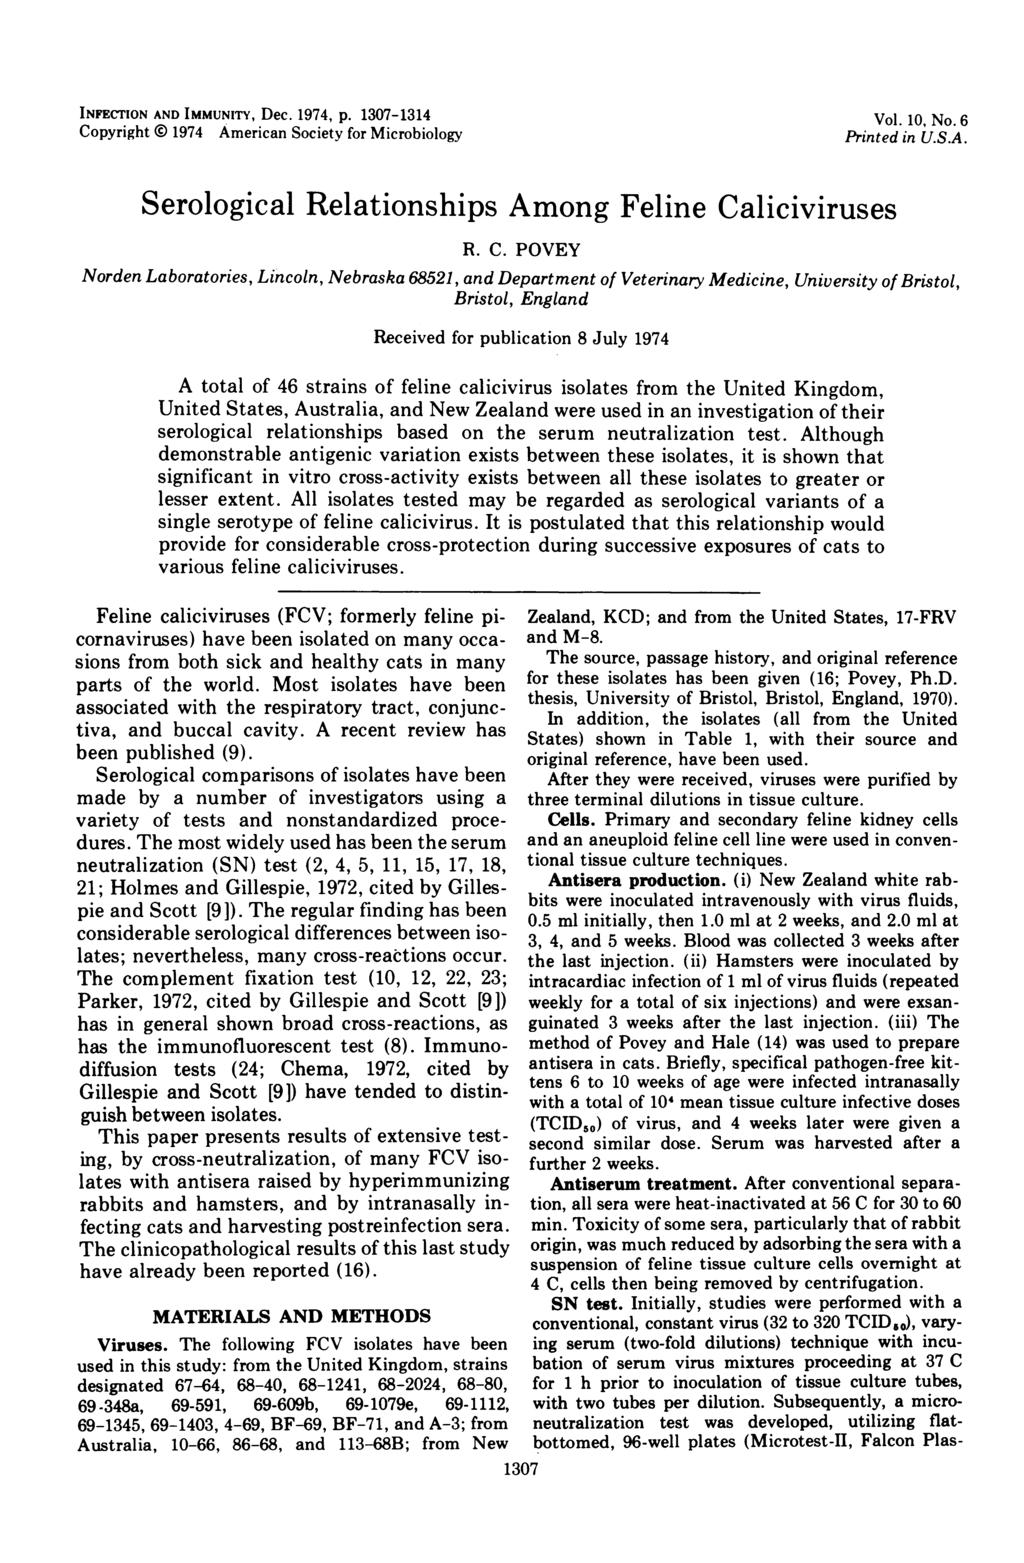 INFECTION AND IMMUNITY, Dec. 1974, p. 137-1314 Co